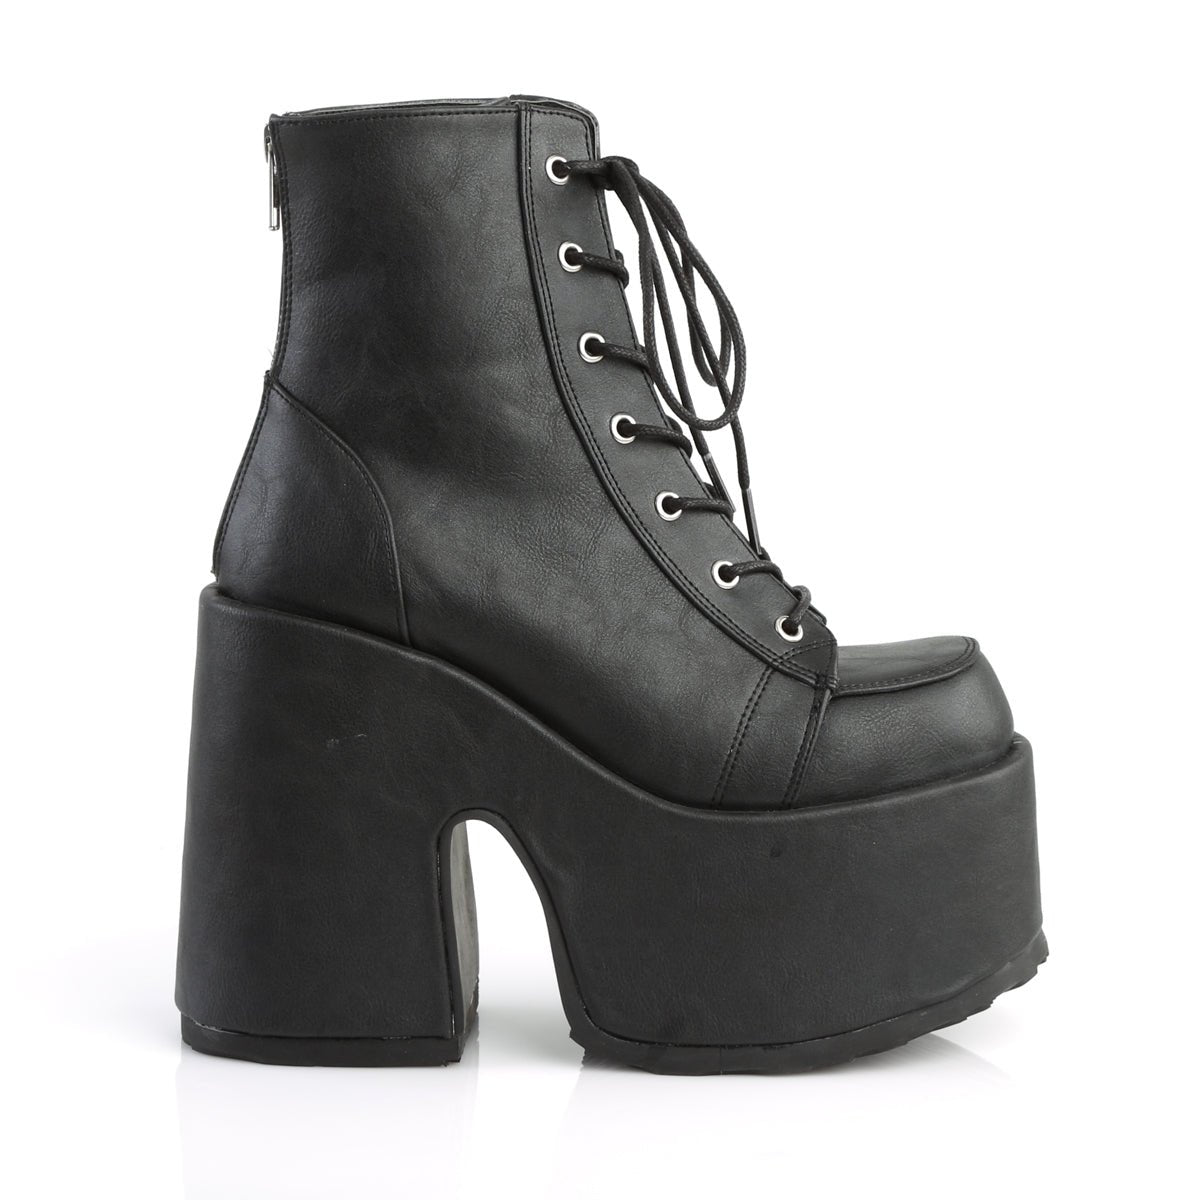 Too Fast | Demonia Camel 203 | Black Vegan Leather Women's Ankle Boots